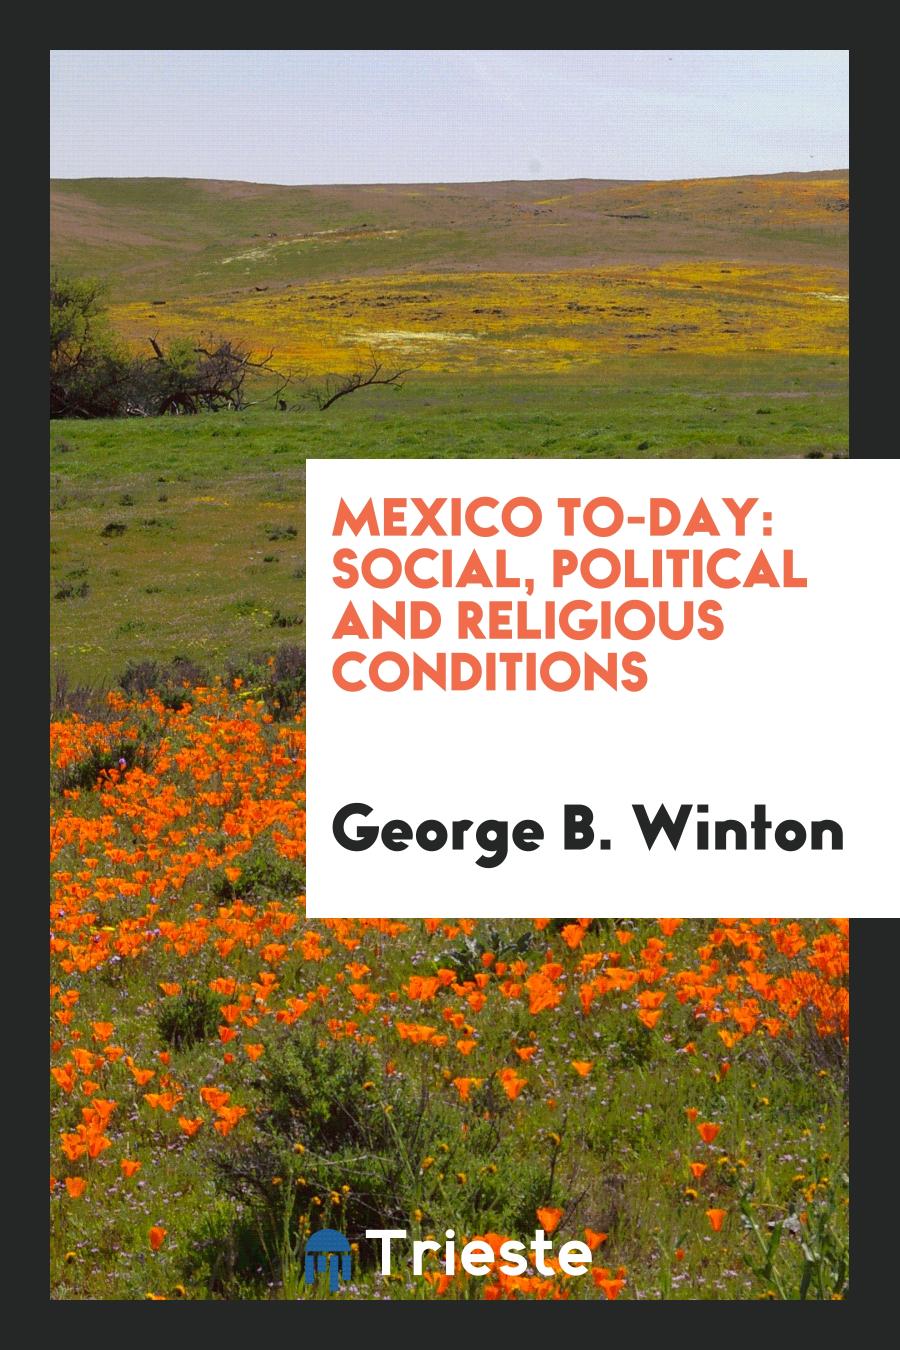 Mexico To-Day: Social, Political and Religious Conditions